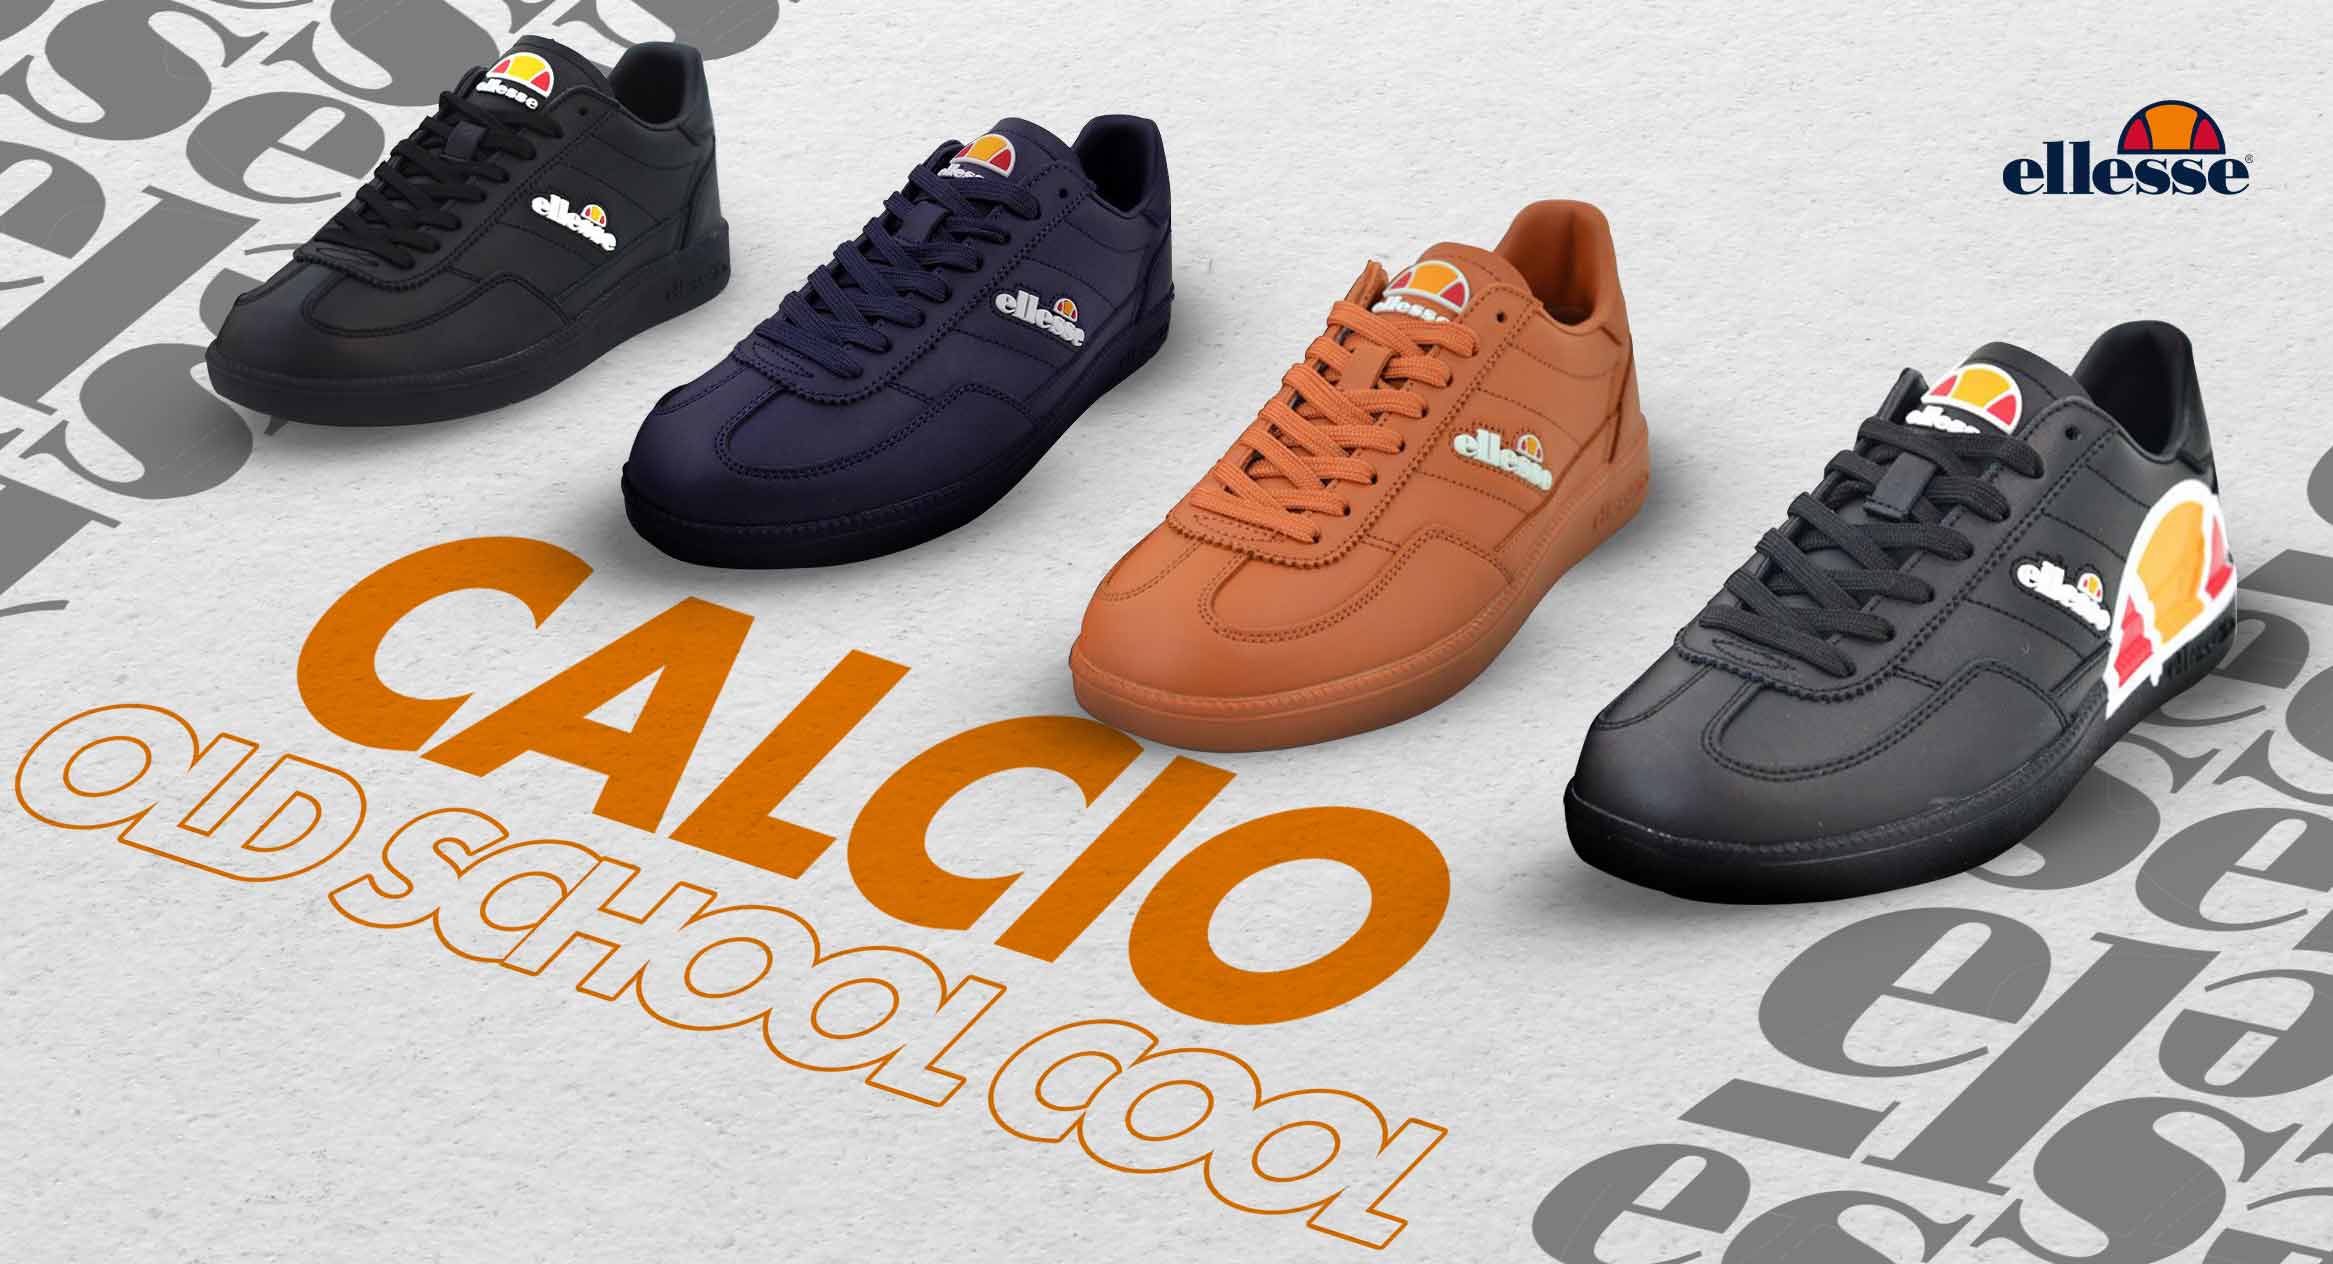  Ellesse - Women's Fashion: Clothing, Shoes & Jewelry